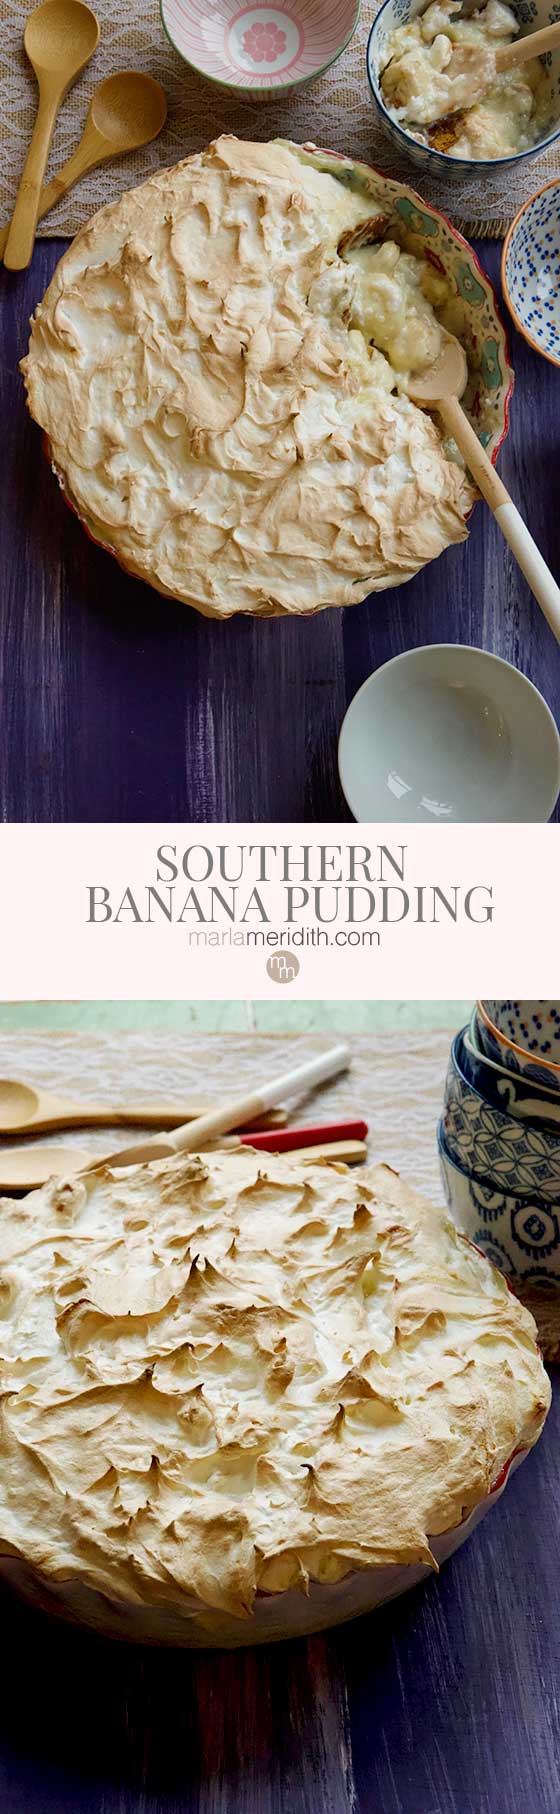 The Best Southern Banana Pudding recipe, a special dessert! MarlaMeridith.com